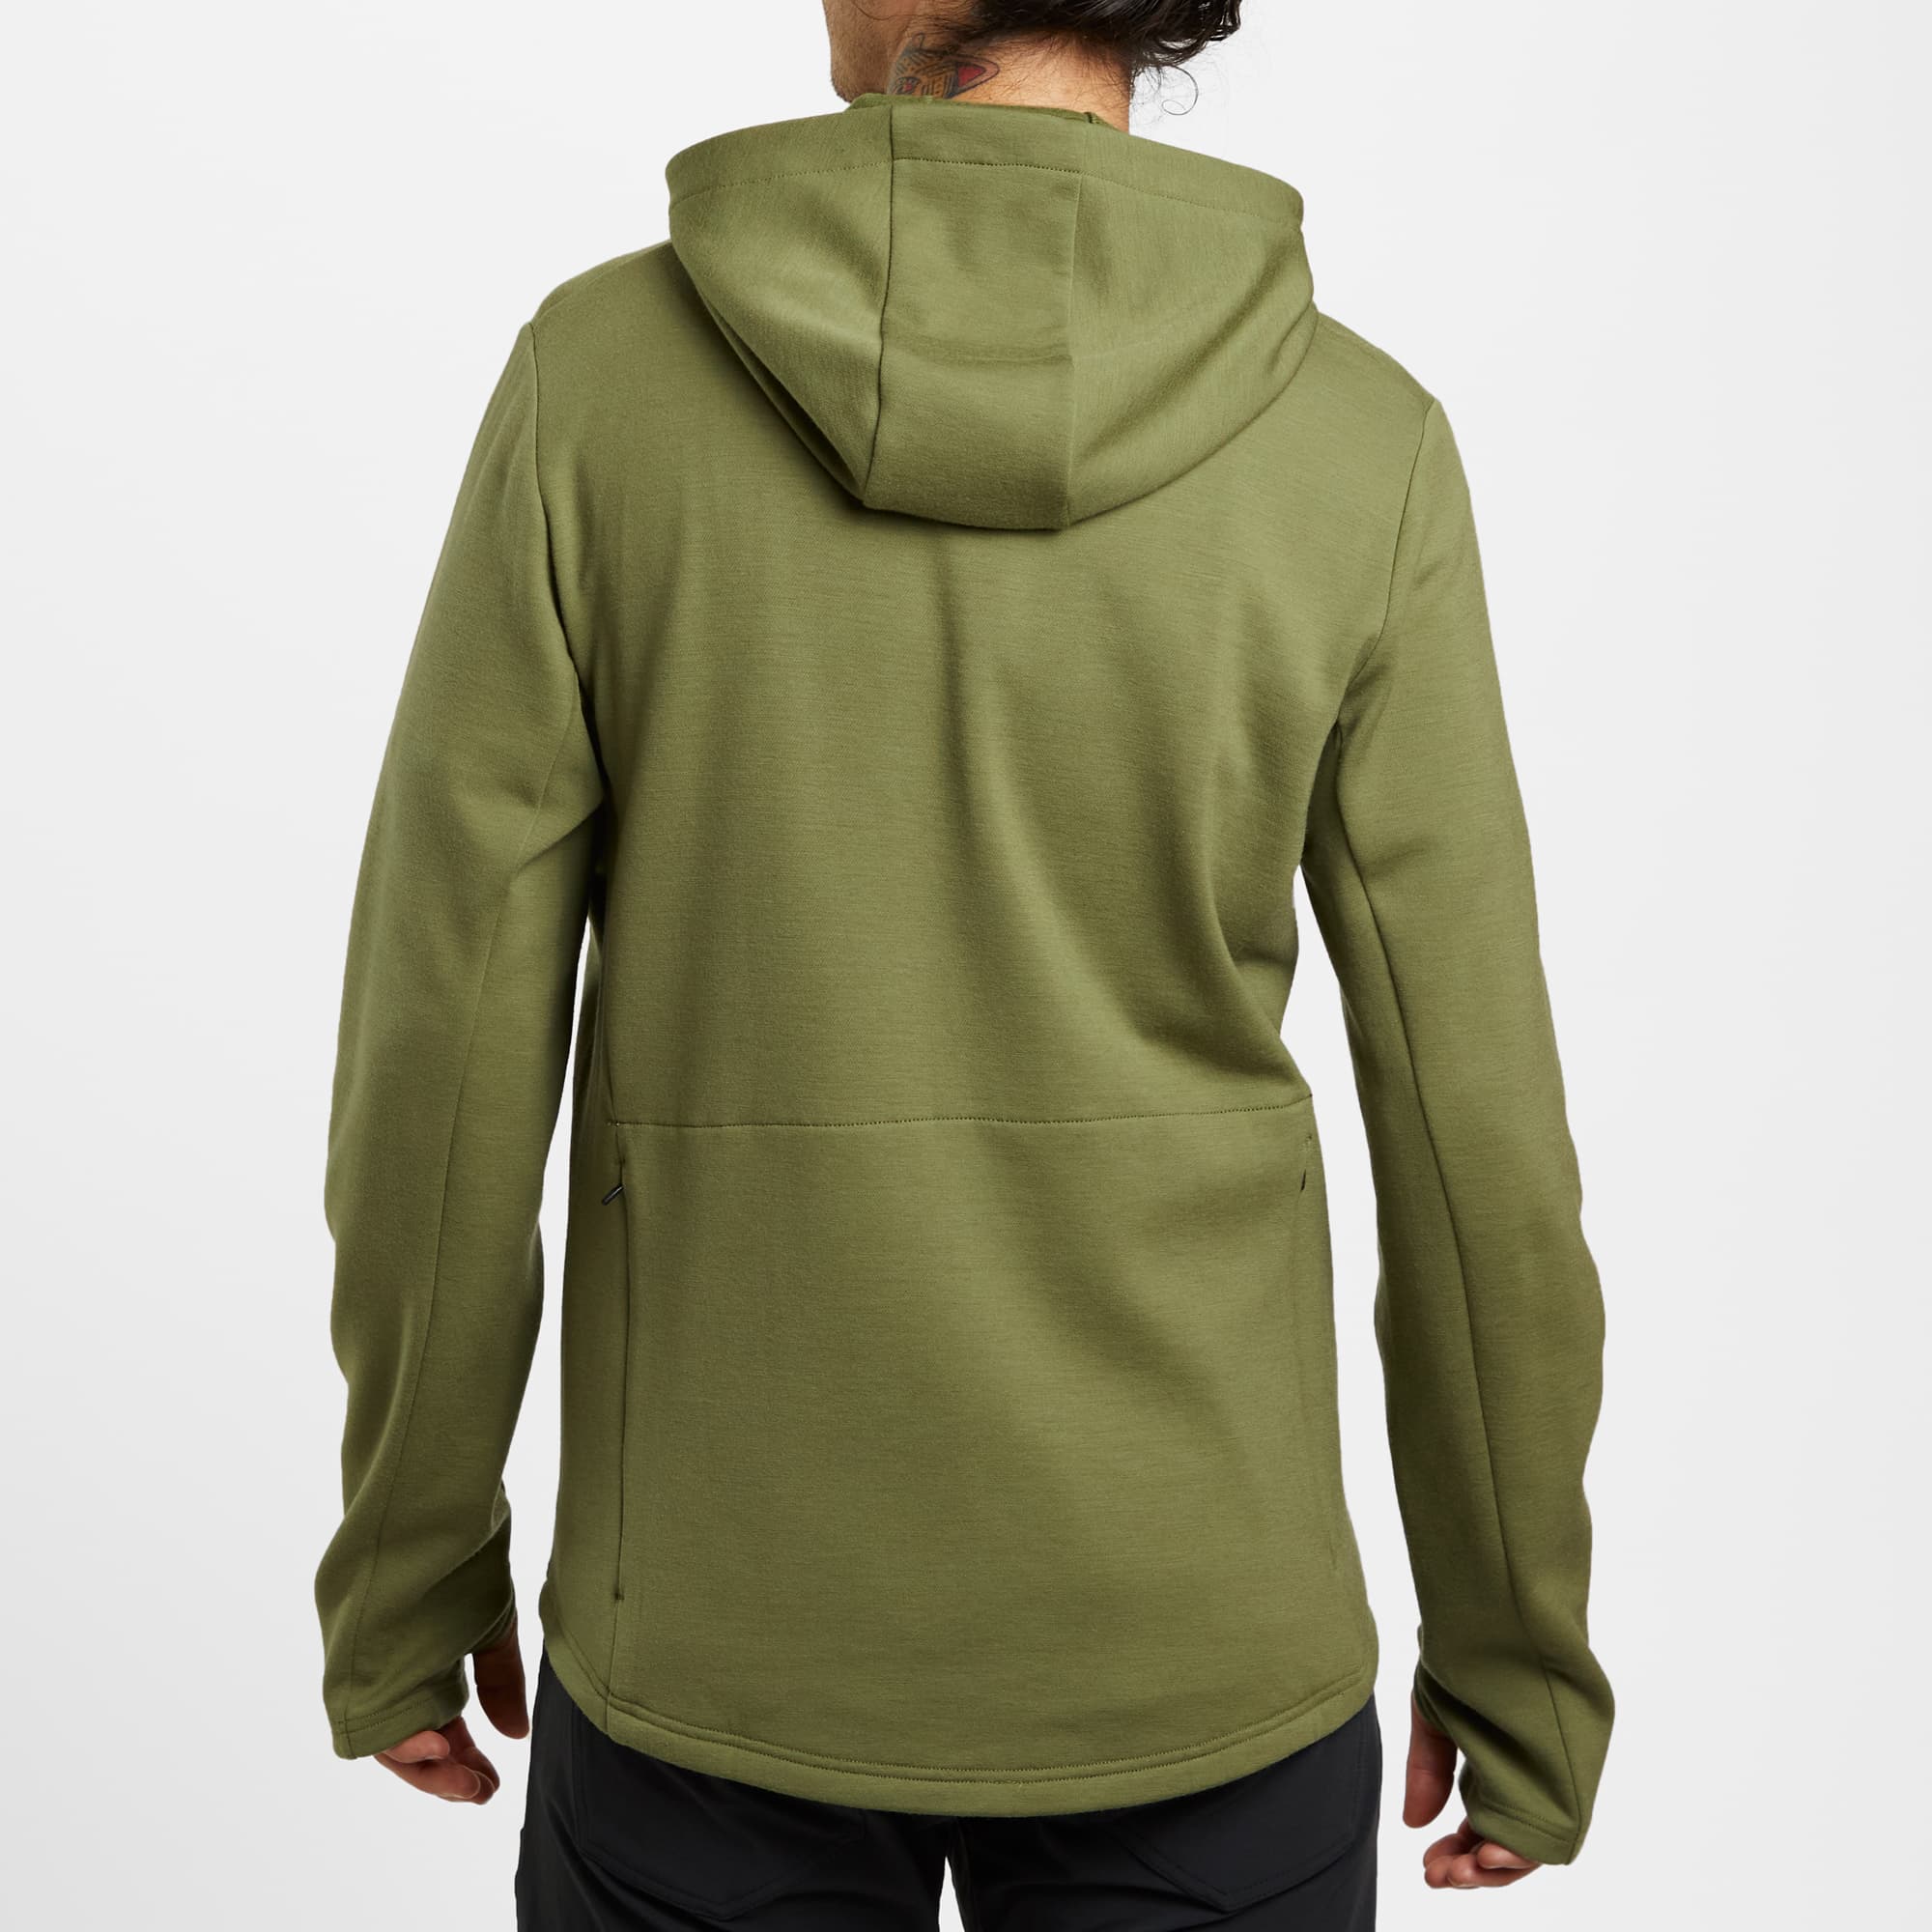 Men's merino blend hoodie in green worn by a man back view #color_olive branch